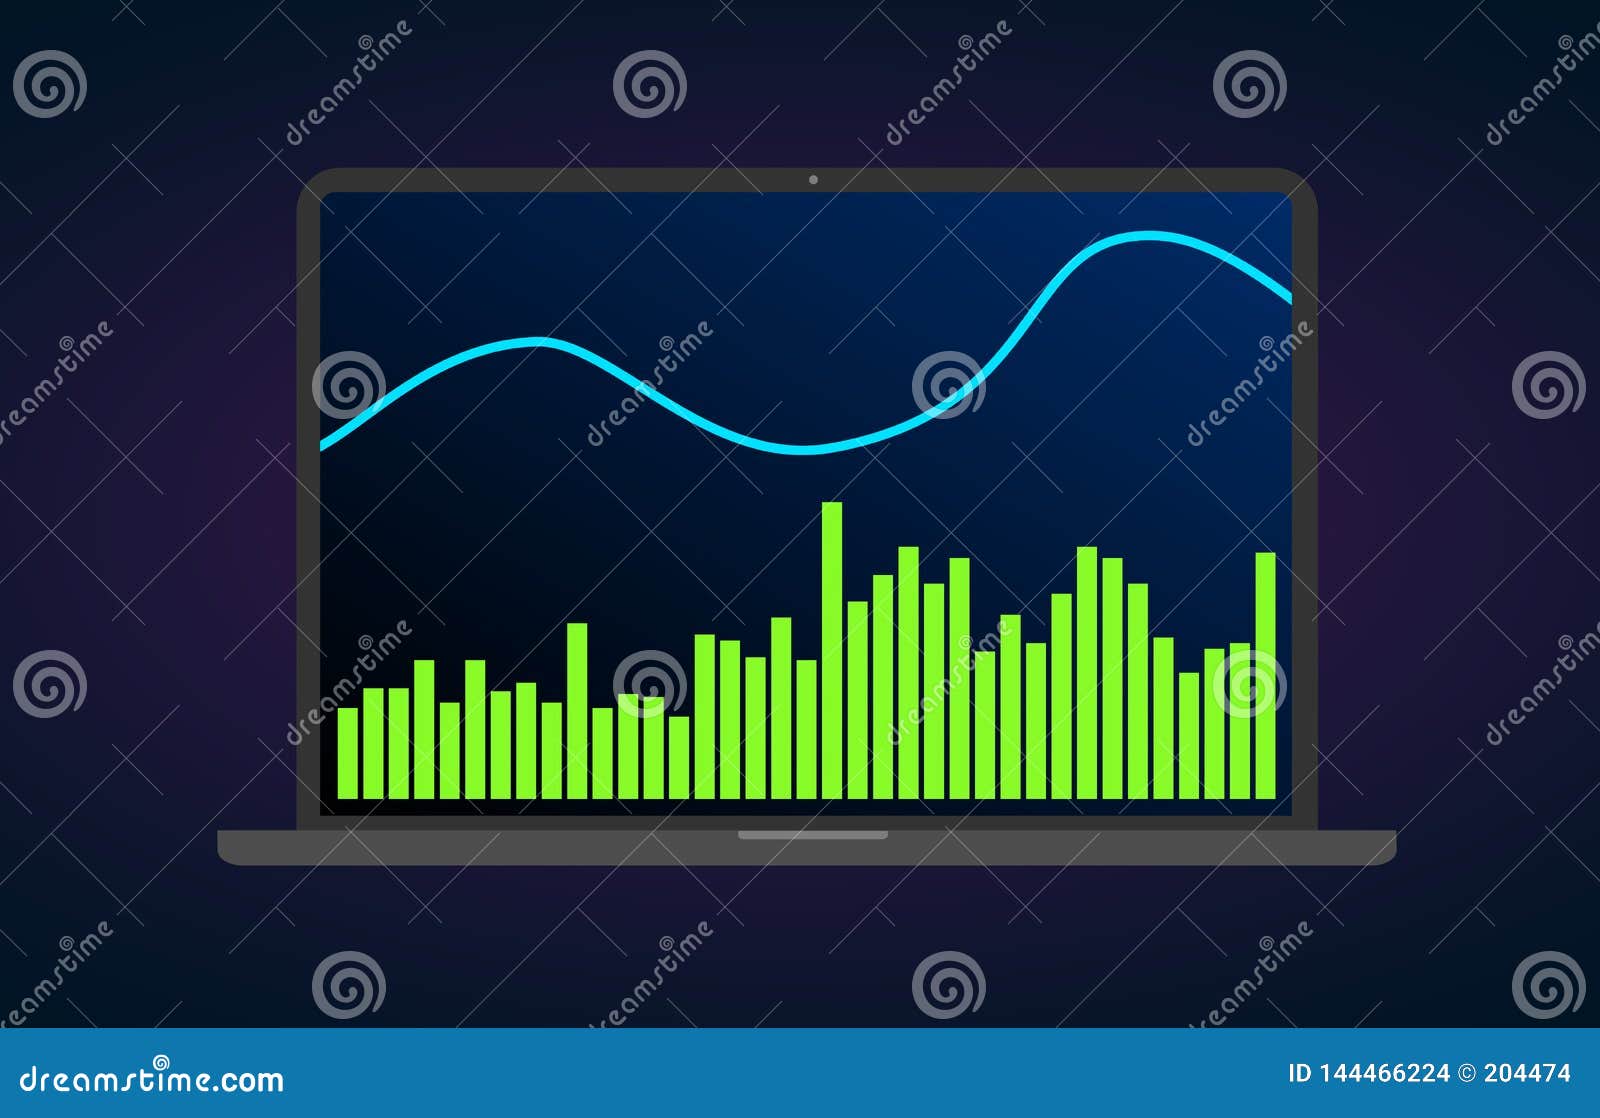 Volume Indicator Technical Analysis. Vector Stock And ...